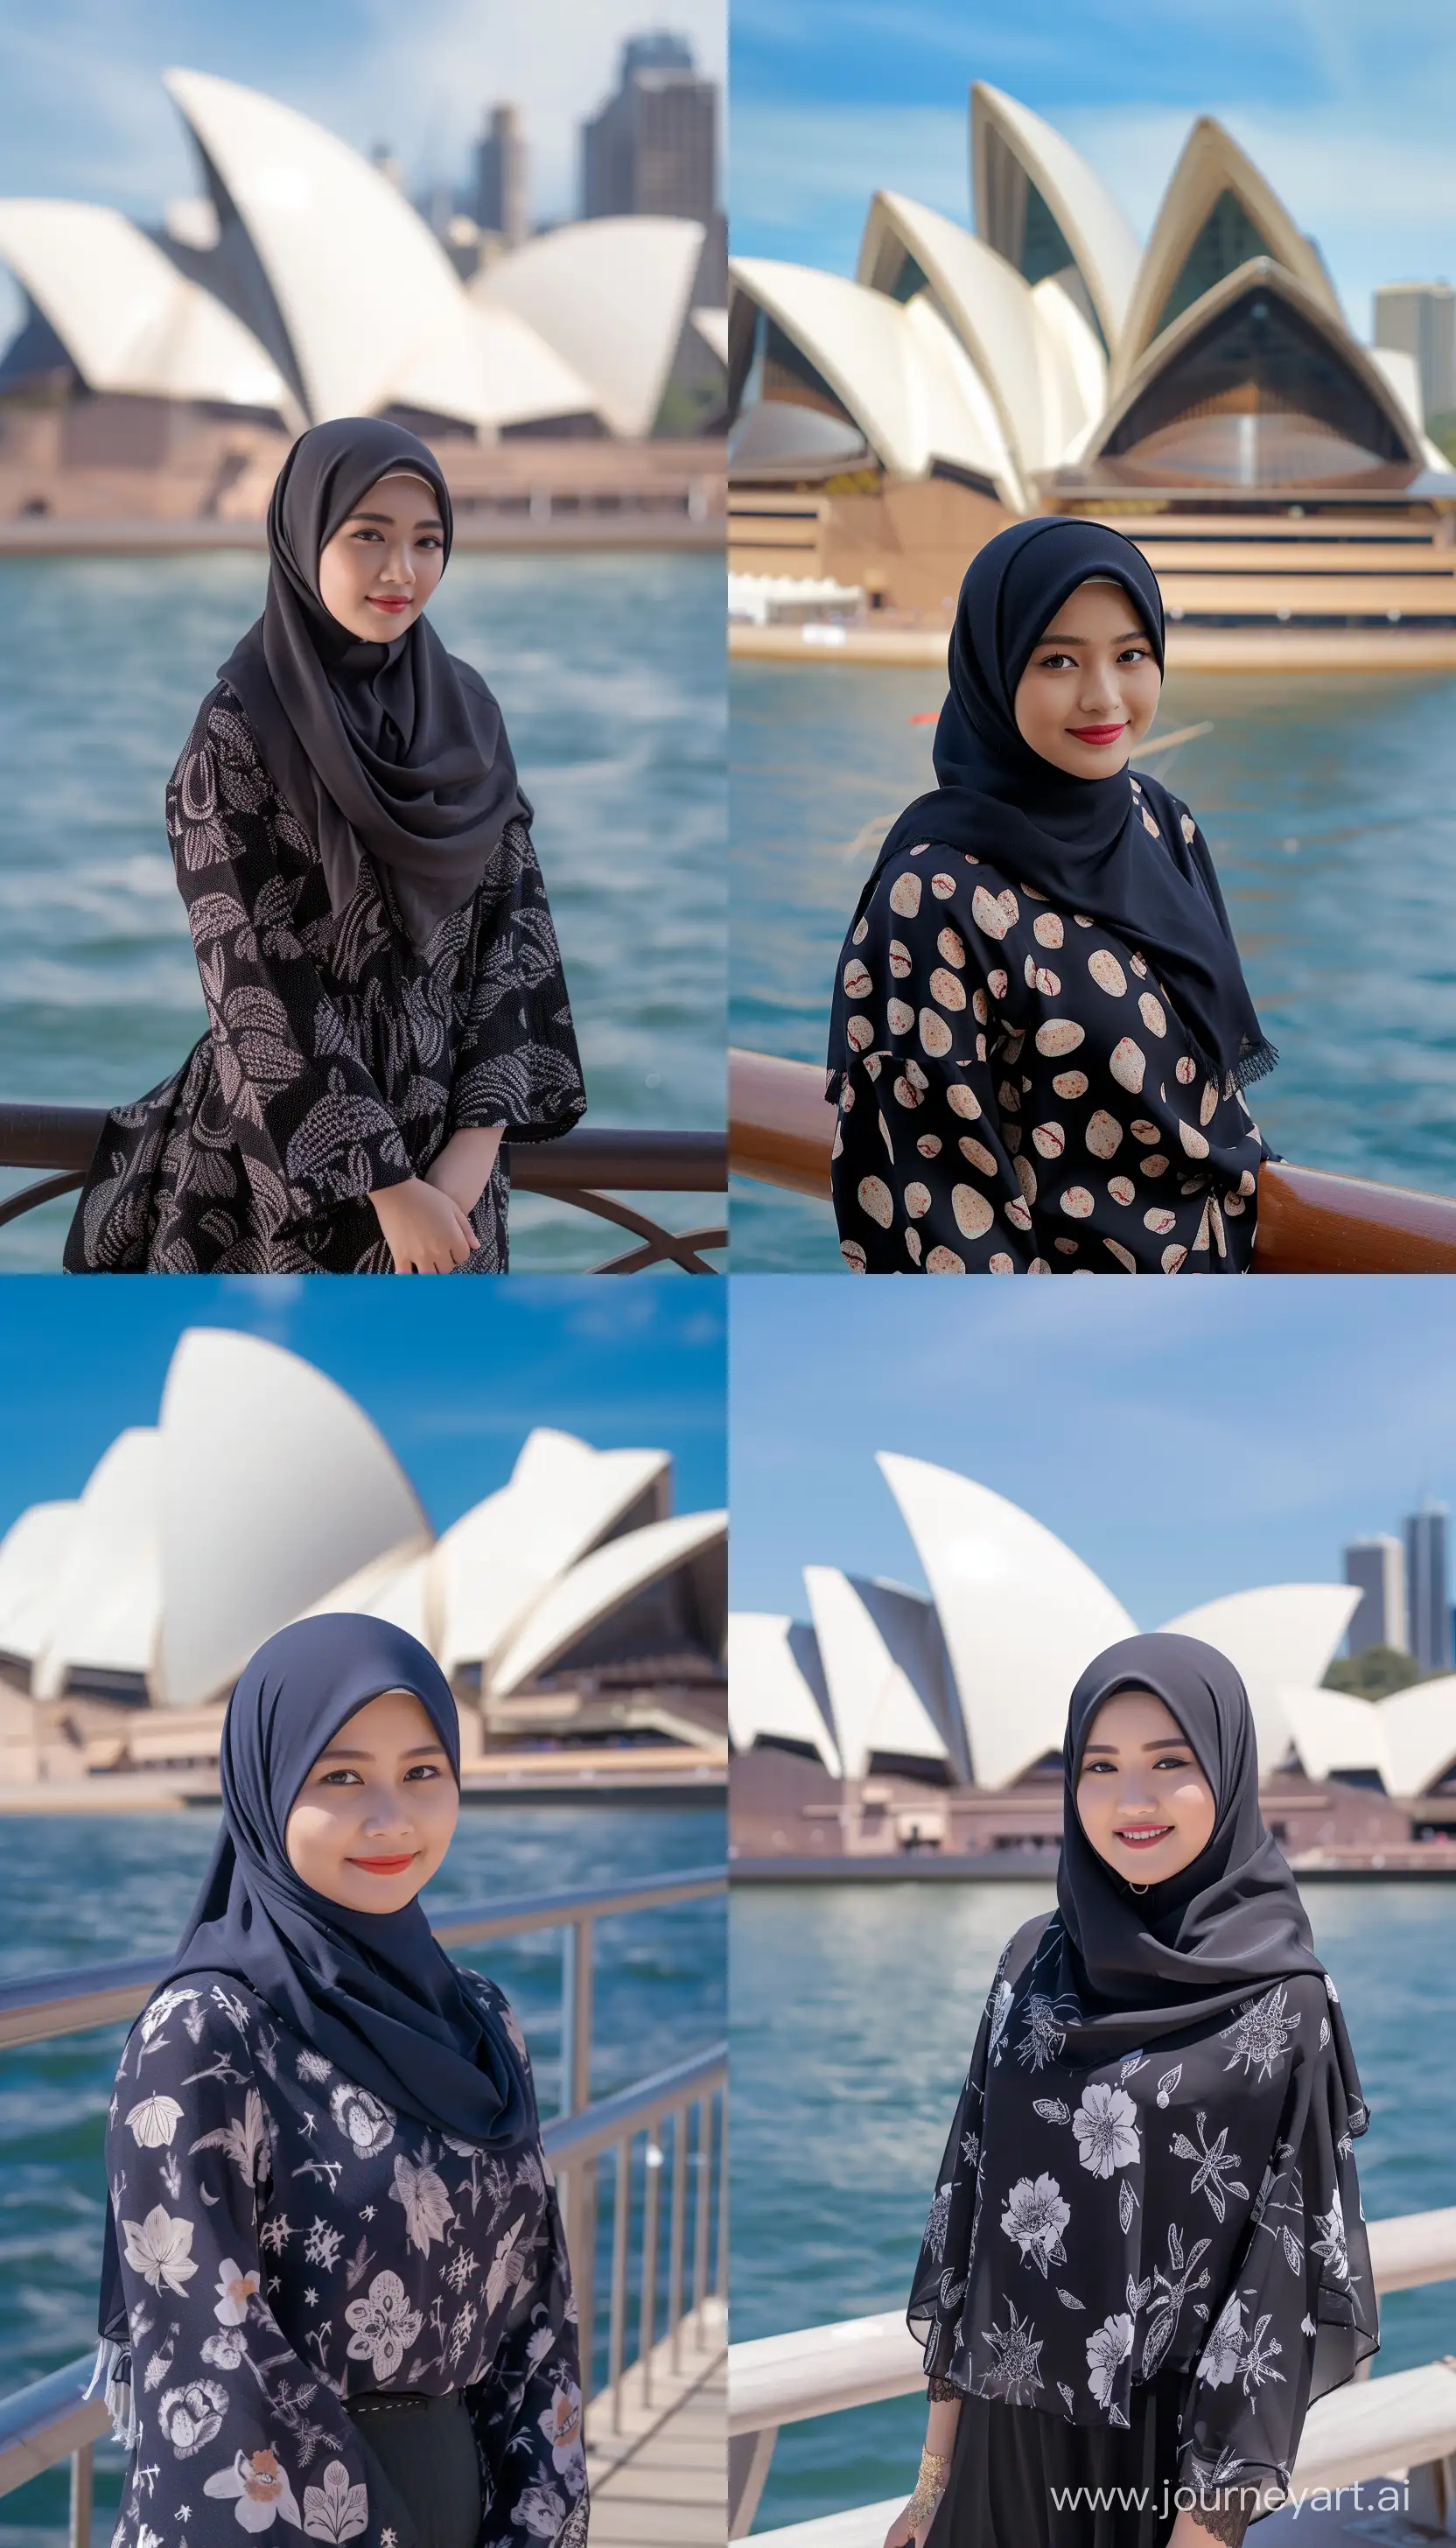 Graceful-Indonesian-Woman-in-Hijab-at-Sydney-Opera-House